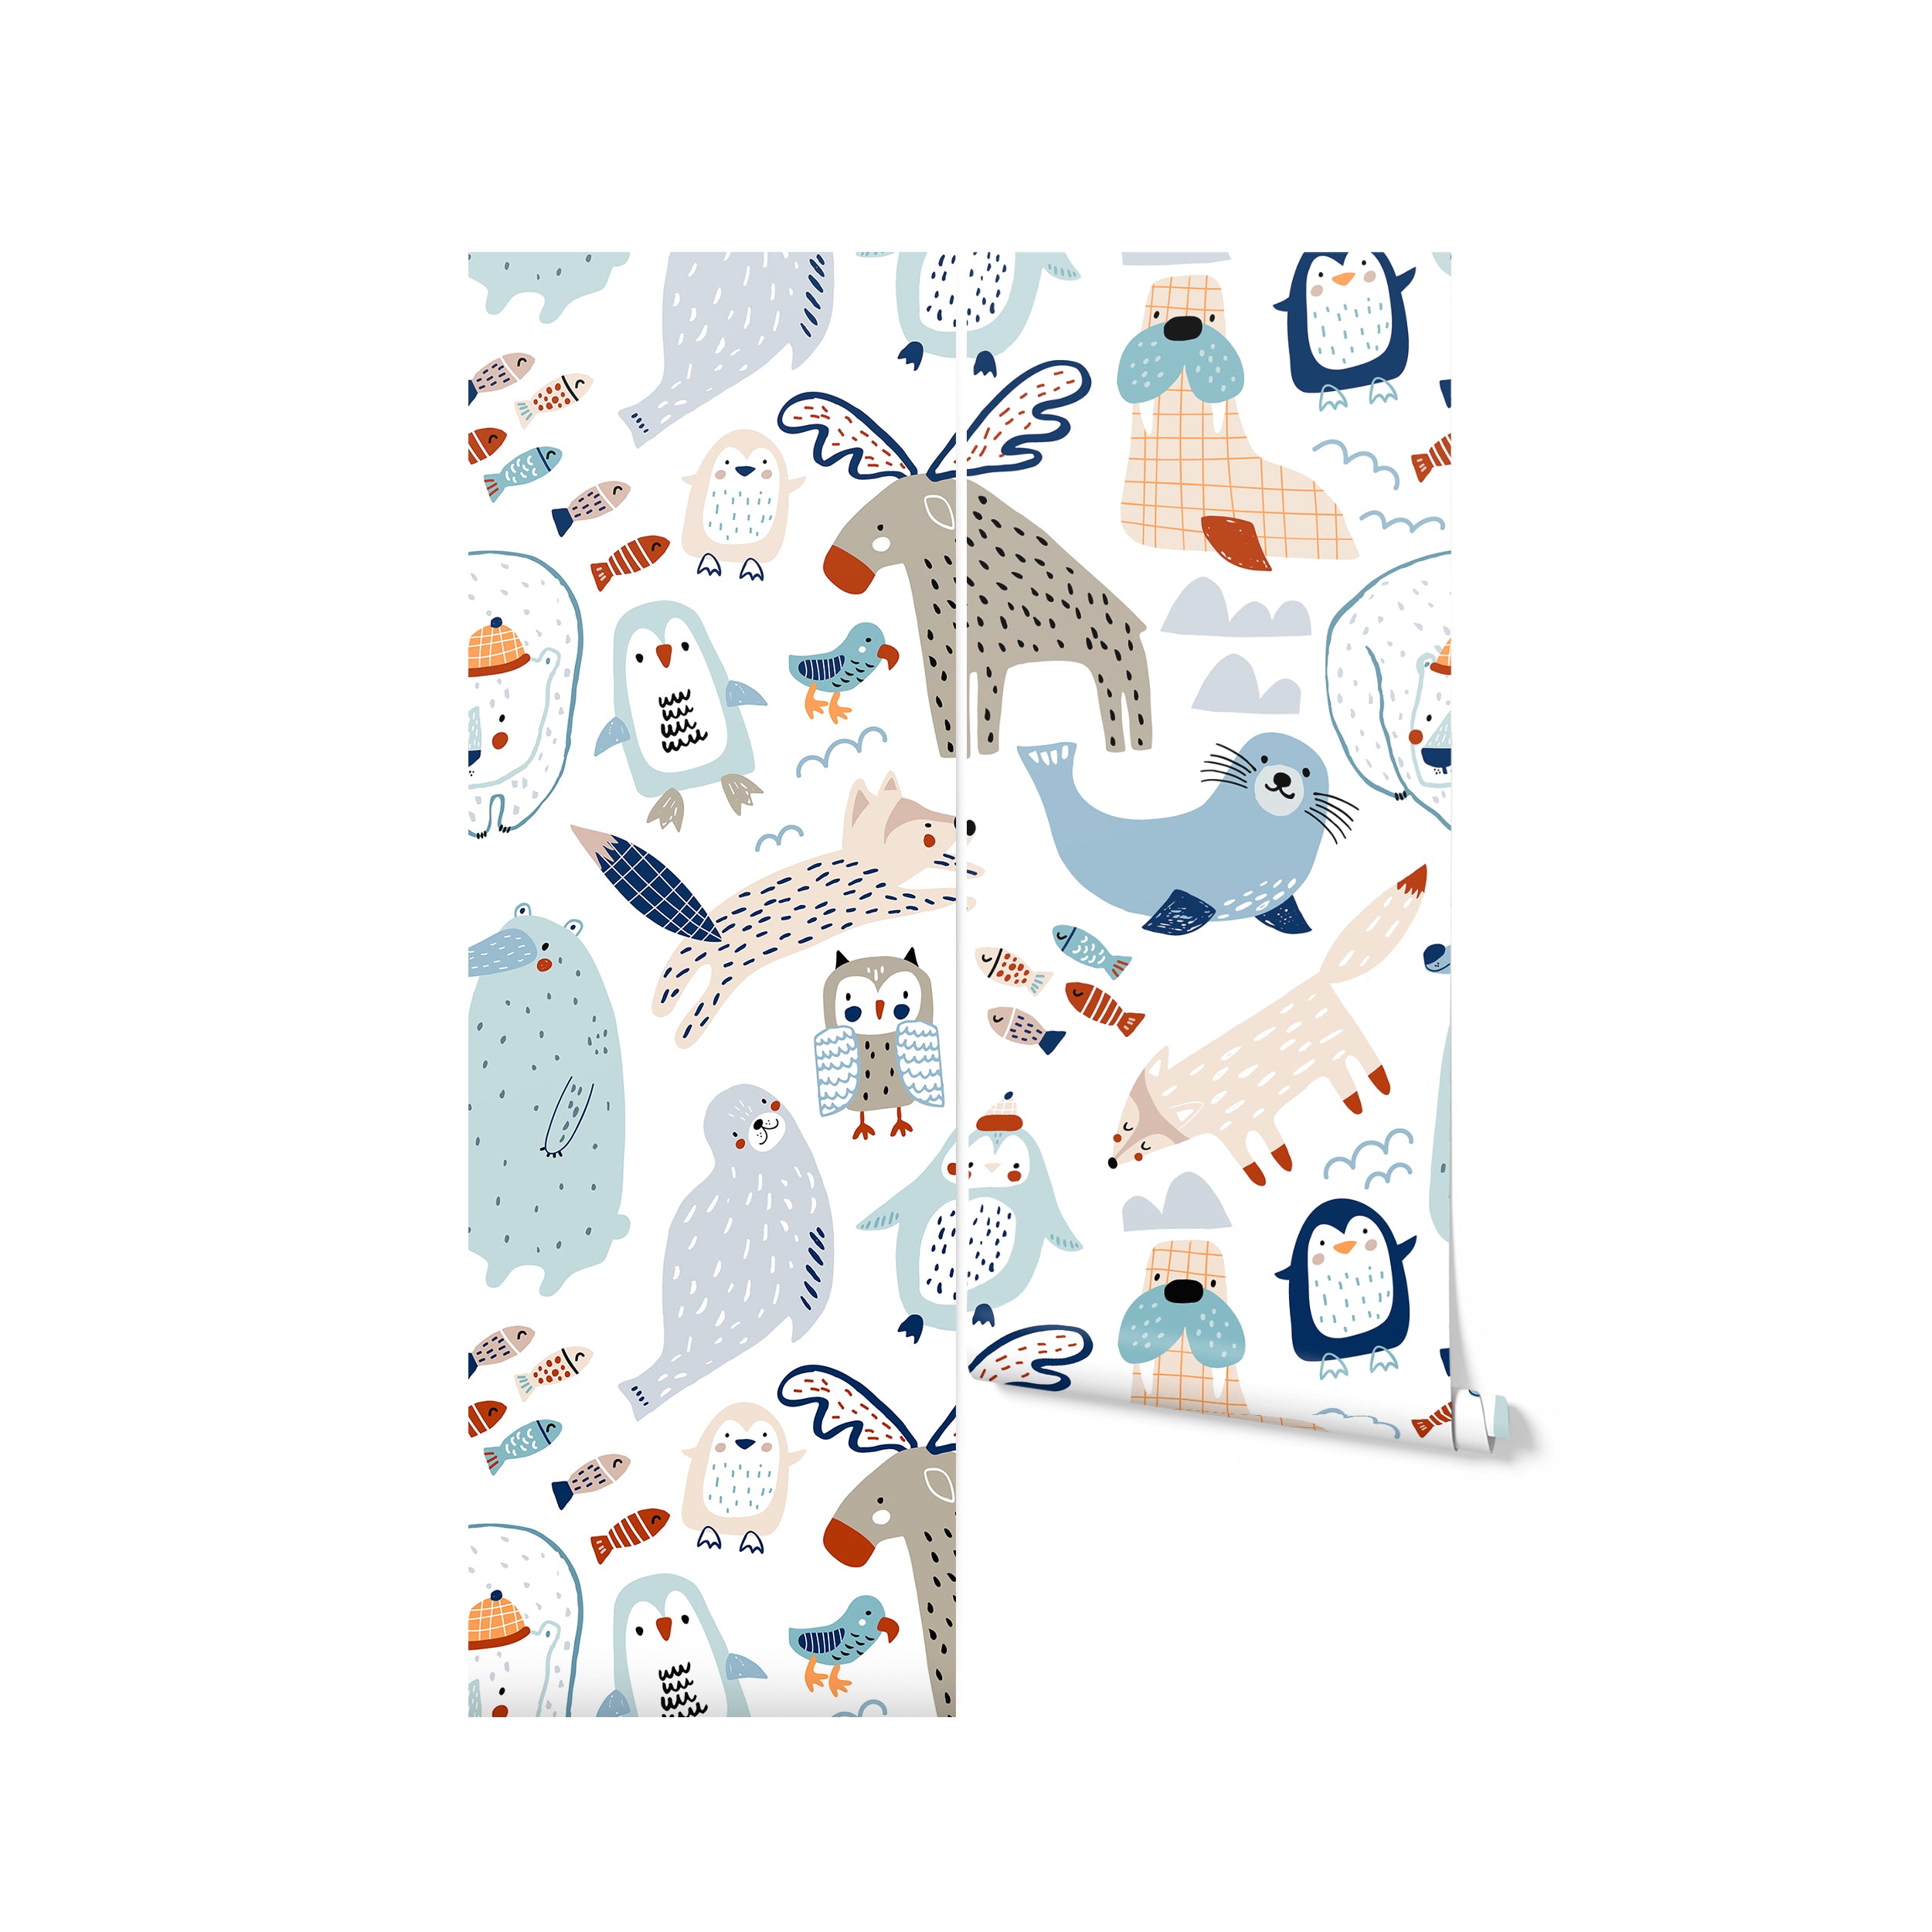 A close-up view of a roll of "Nordic Moose Wallpaper" showcasing a colorful and whimsical pattern of various Nordic animals like winged moose, owls, seals, and foxes in playful poses on a light background.